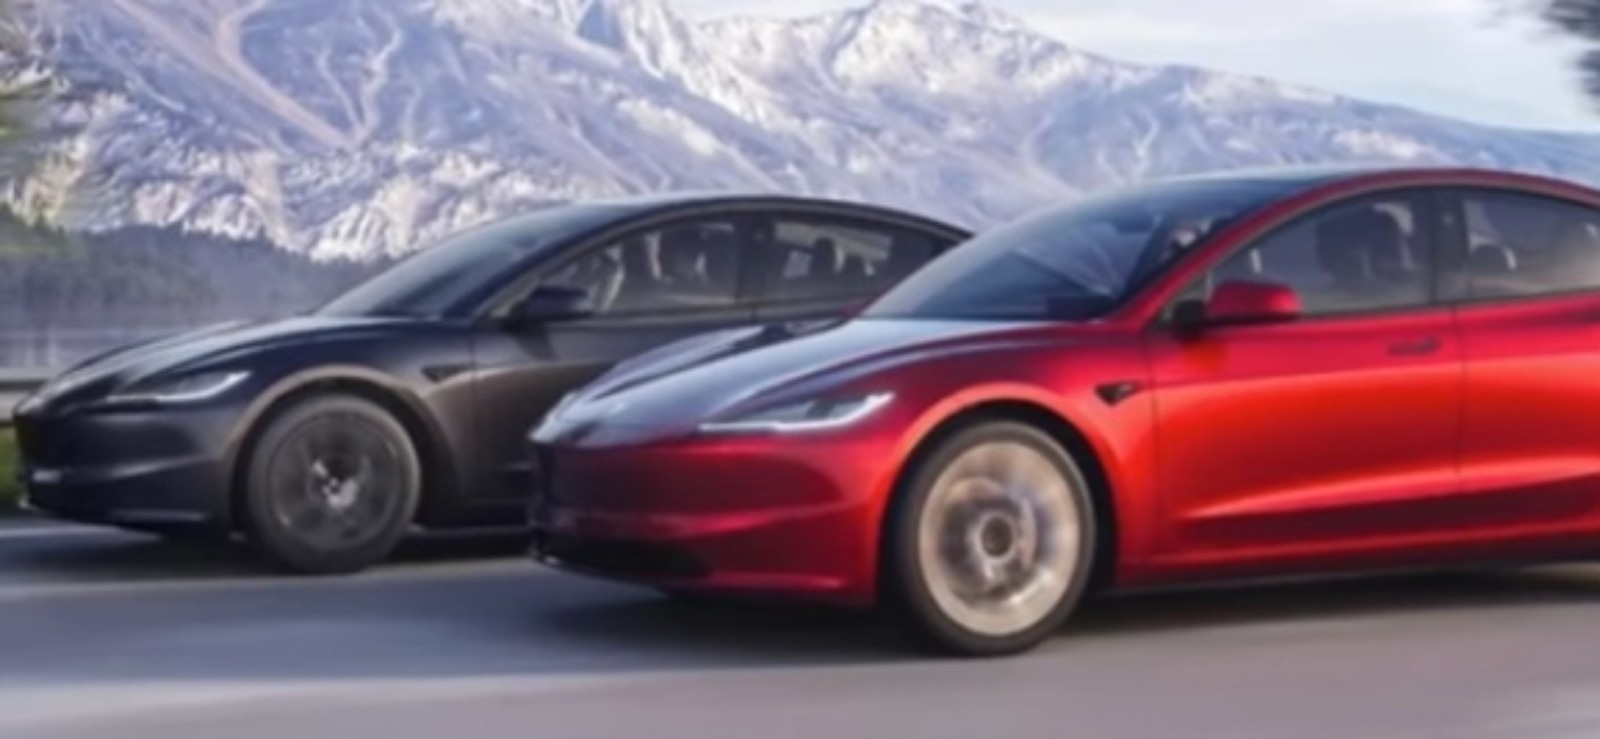 Don’t make your choice yet before checking out this latest Tesla electric car…